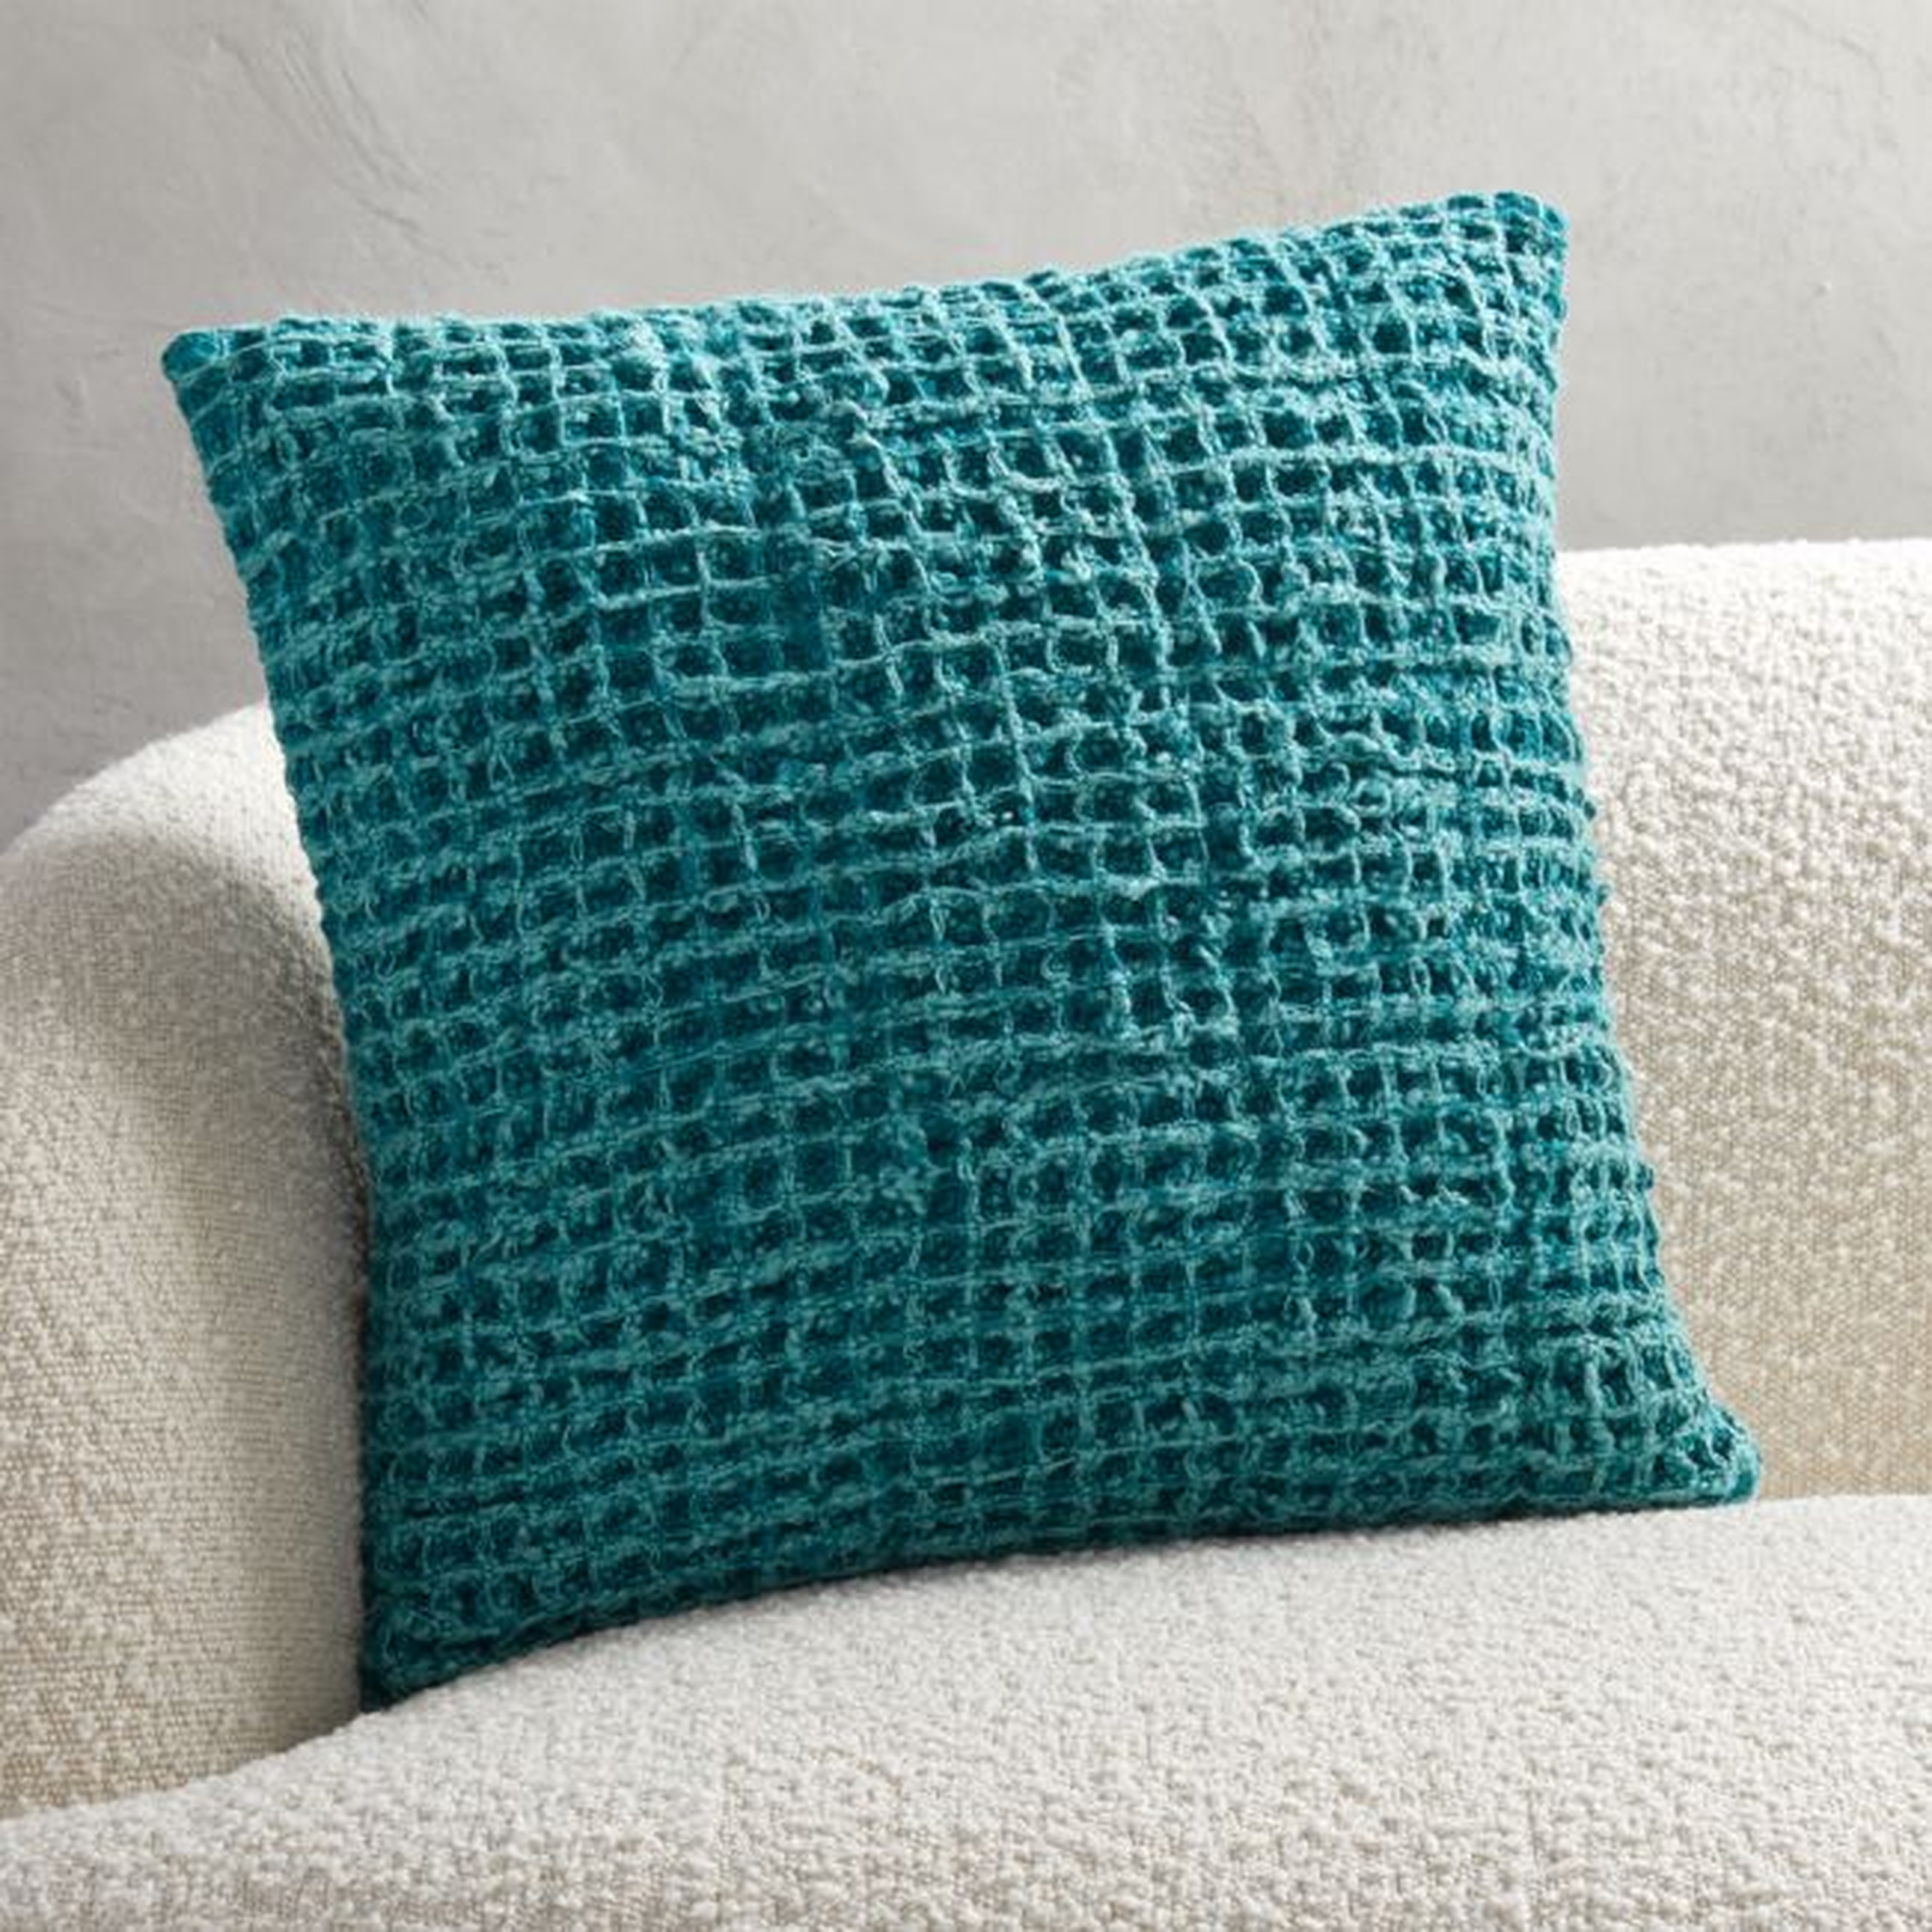 18" Vortex Waffle Weave Pillow Teal with Down-Alternative Insert. - CB2